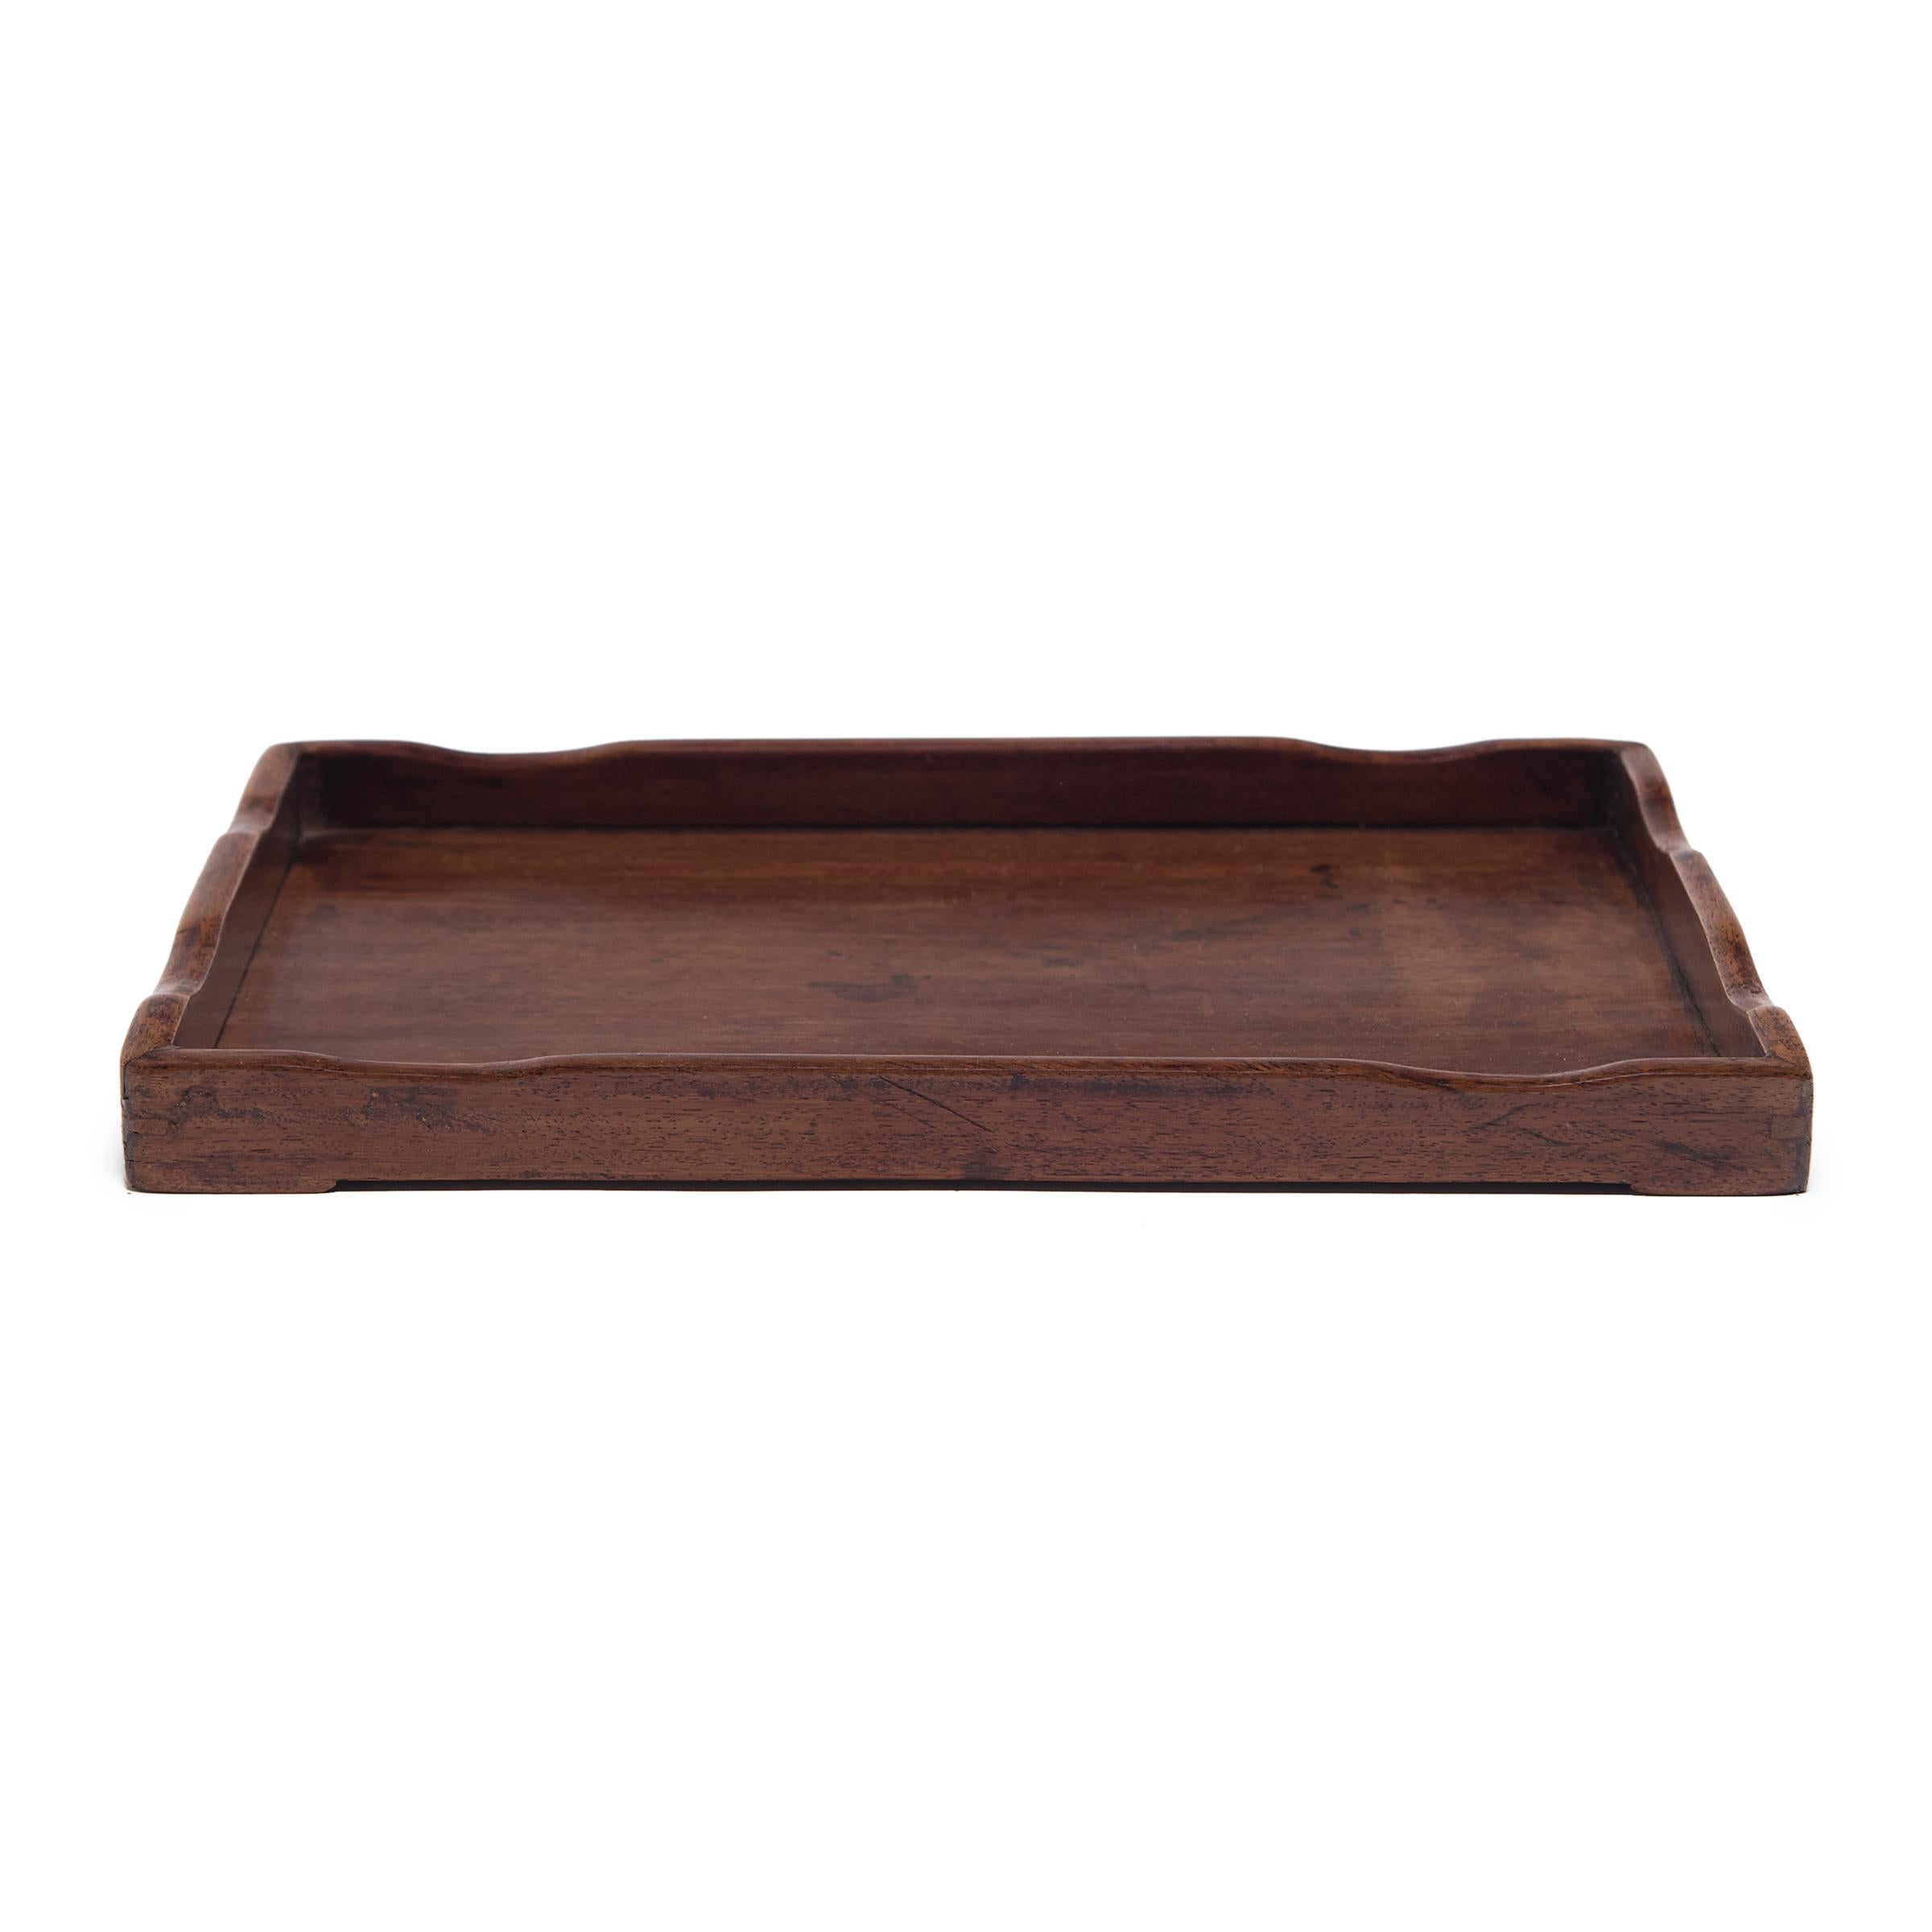 Crafted of fine hardwood, this 19th century tray once served tea or displayed calligraphy tools in a scholar's studio. Framed by low, curved sides, the tray has a simple rectangular form that showcases its rich color and fine wood grain.